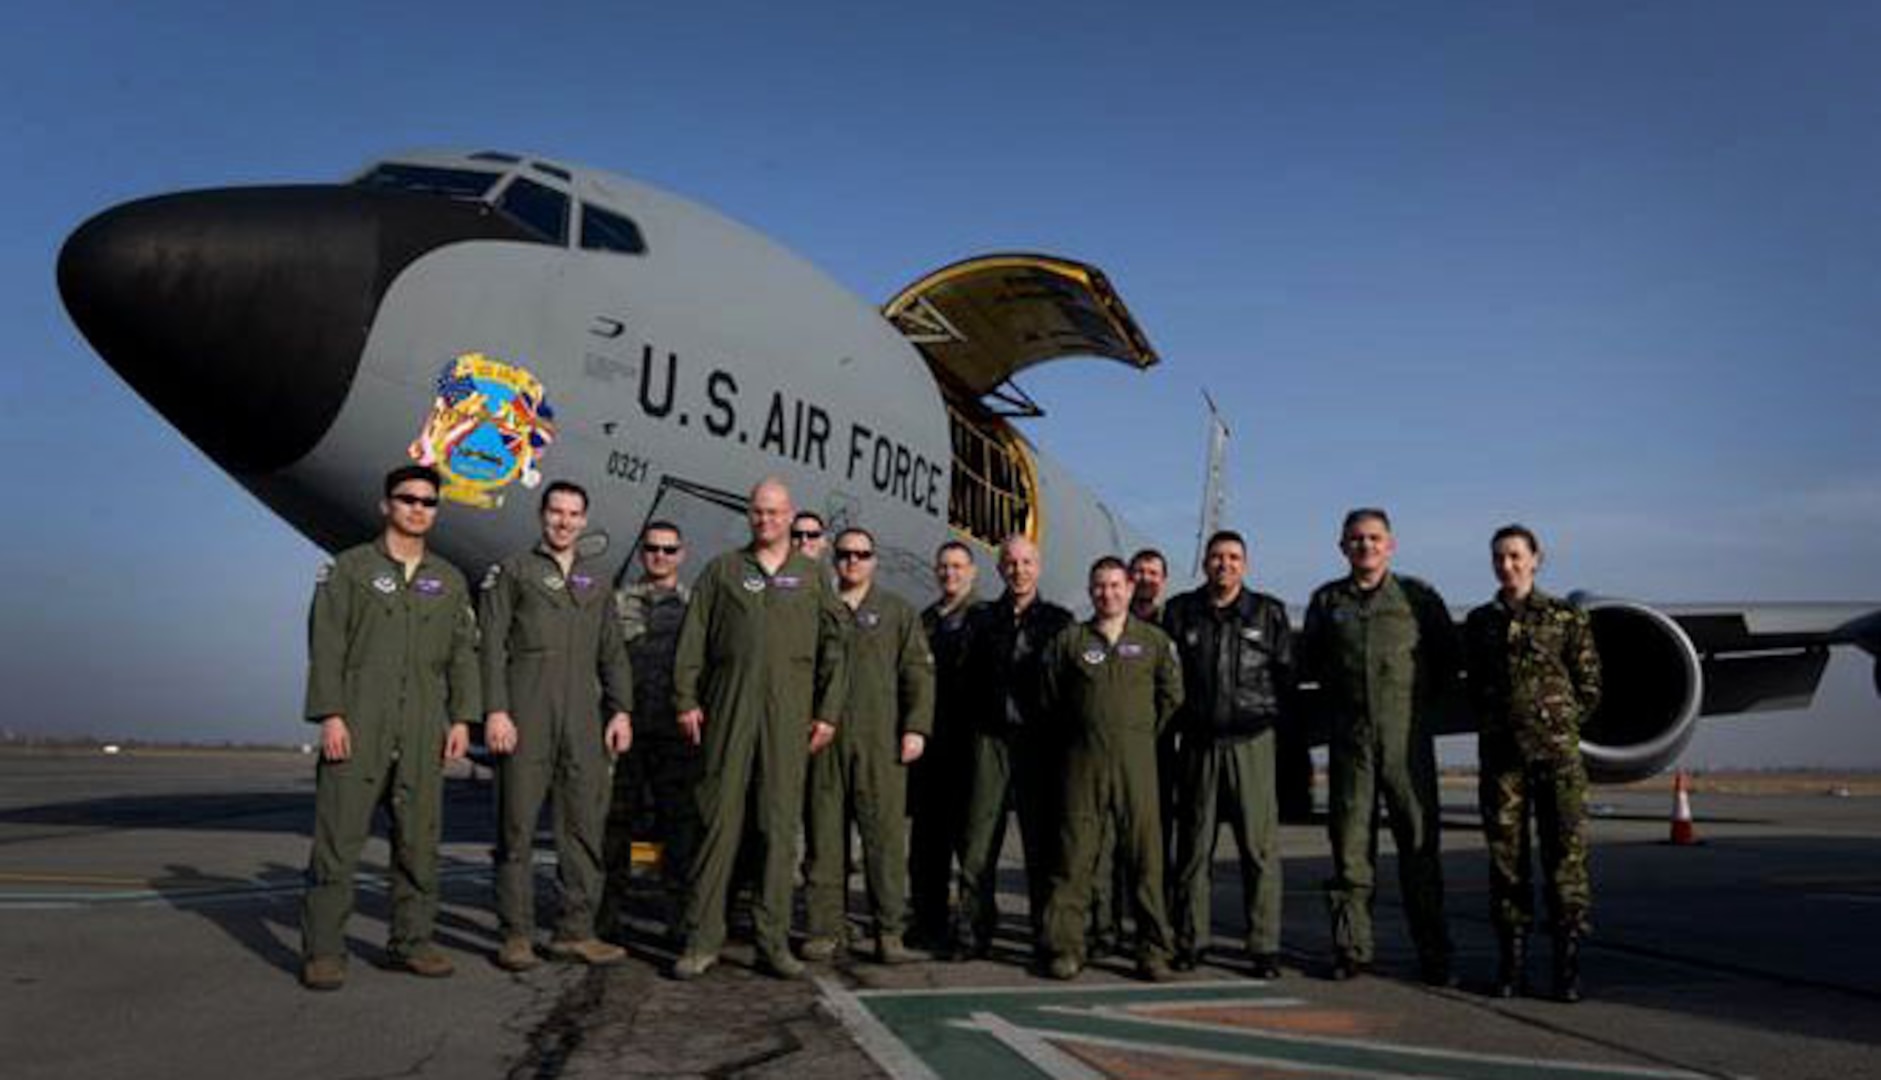 U.S. Air Force and Romanian air force Airmen pose for a photo after a flight Feb. 28, 2017, during air refueling training over Bucharest, Romania. The RoAF F-16 Fighting Falcons made their first contact with a U.S. tanker during the flight as part of air refueling training and certification conducted by the 100th Air Refueling Wing from RAF Mildenhall, England. (U.S. Air Force photo by Staff Sgt. Kate Thornton)